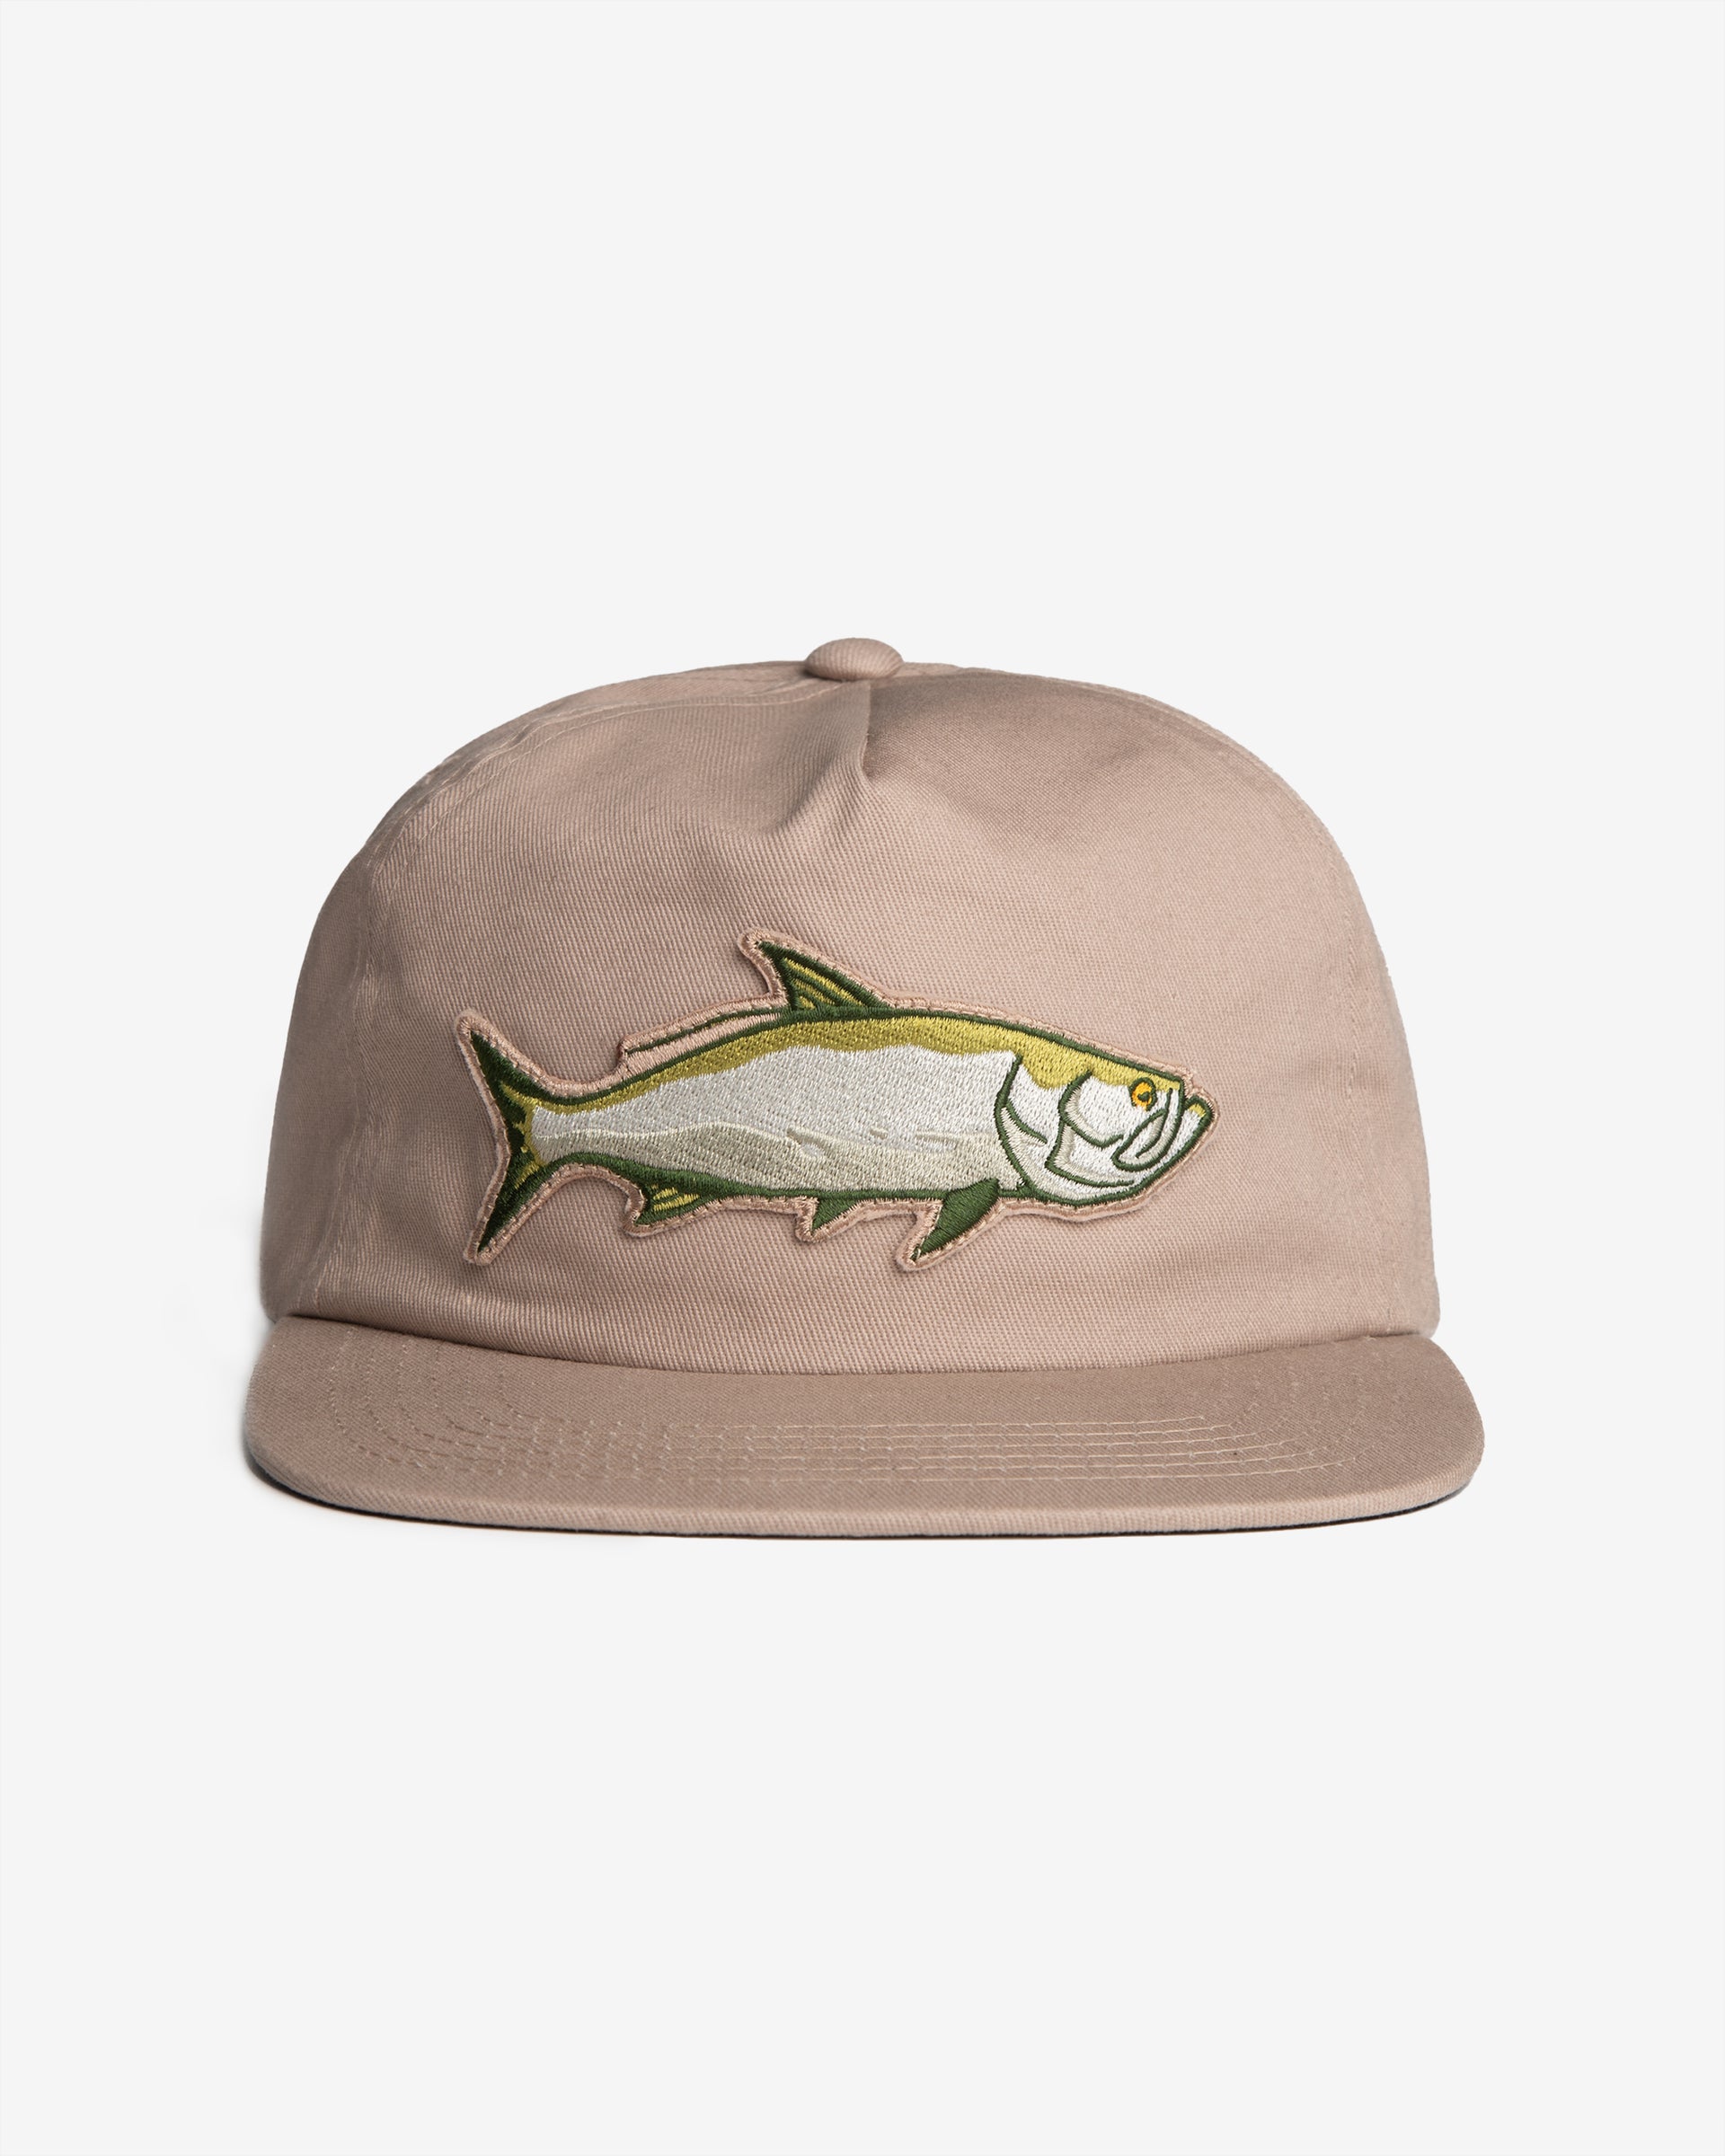 Direct front view of the Jigalode "Tarpon" snapback hat with a large tarpon patch in the front. The hat is tan/khaki with a green and gray tarpon patch across the front.